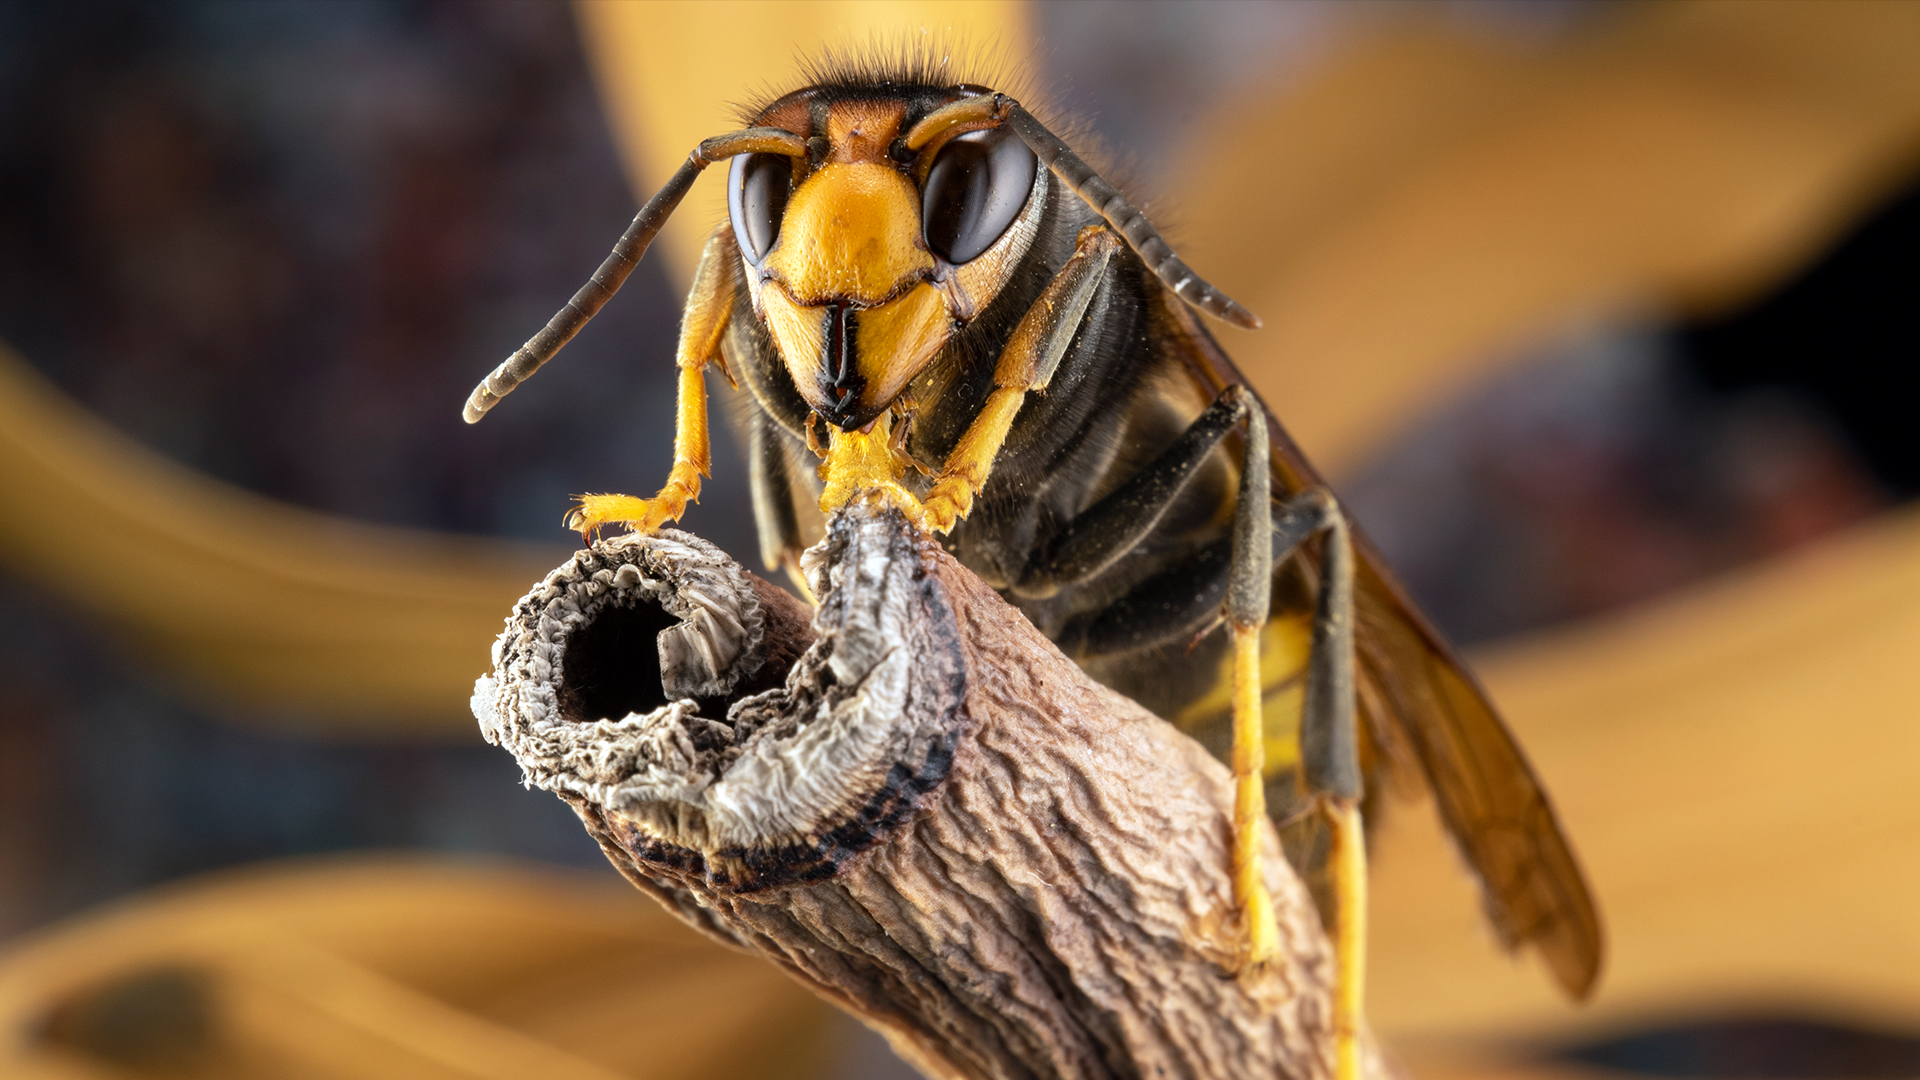 Asian hornet perched on twig.